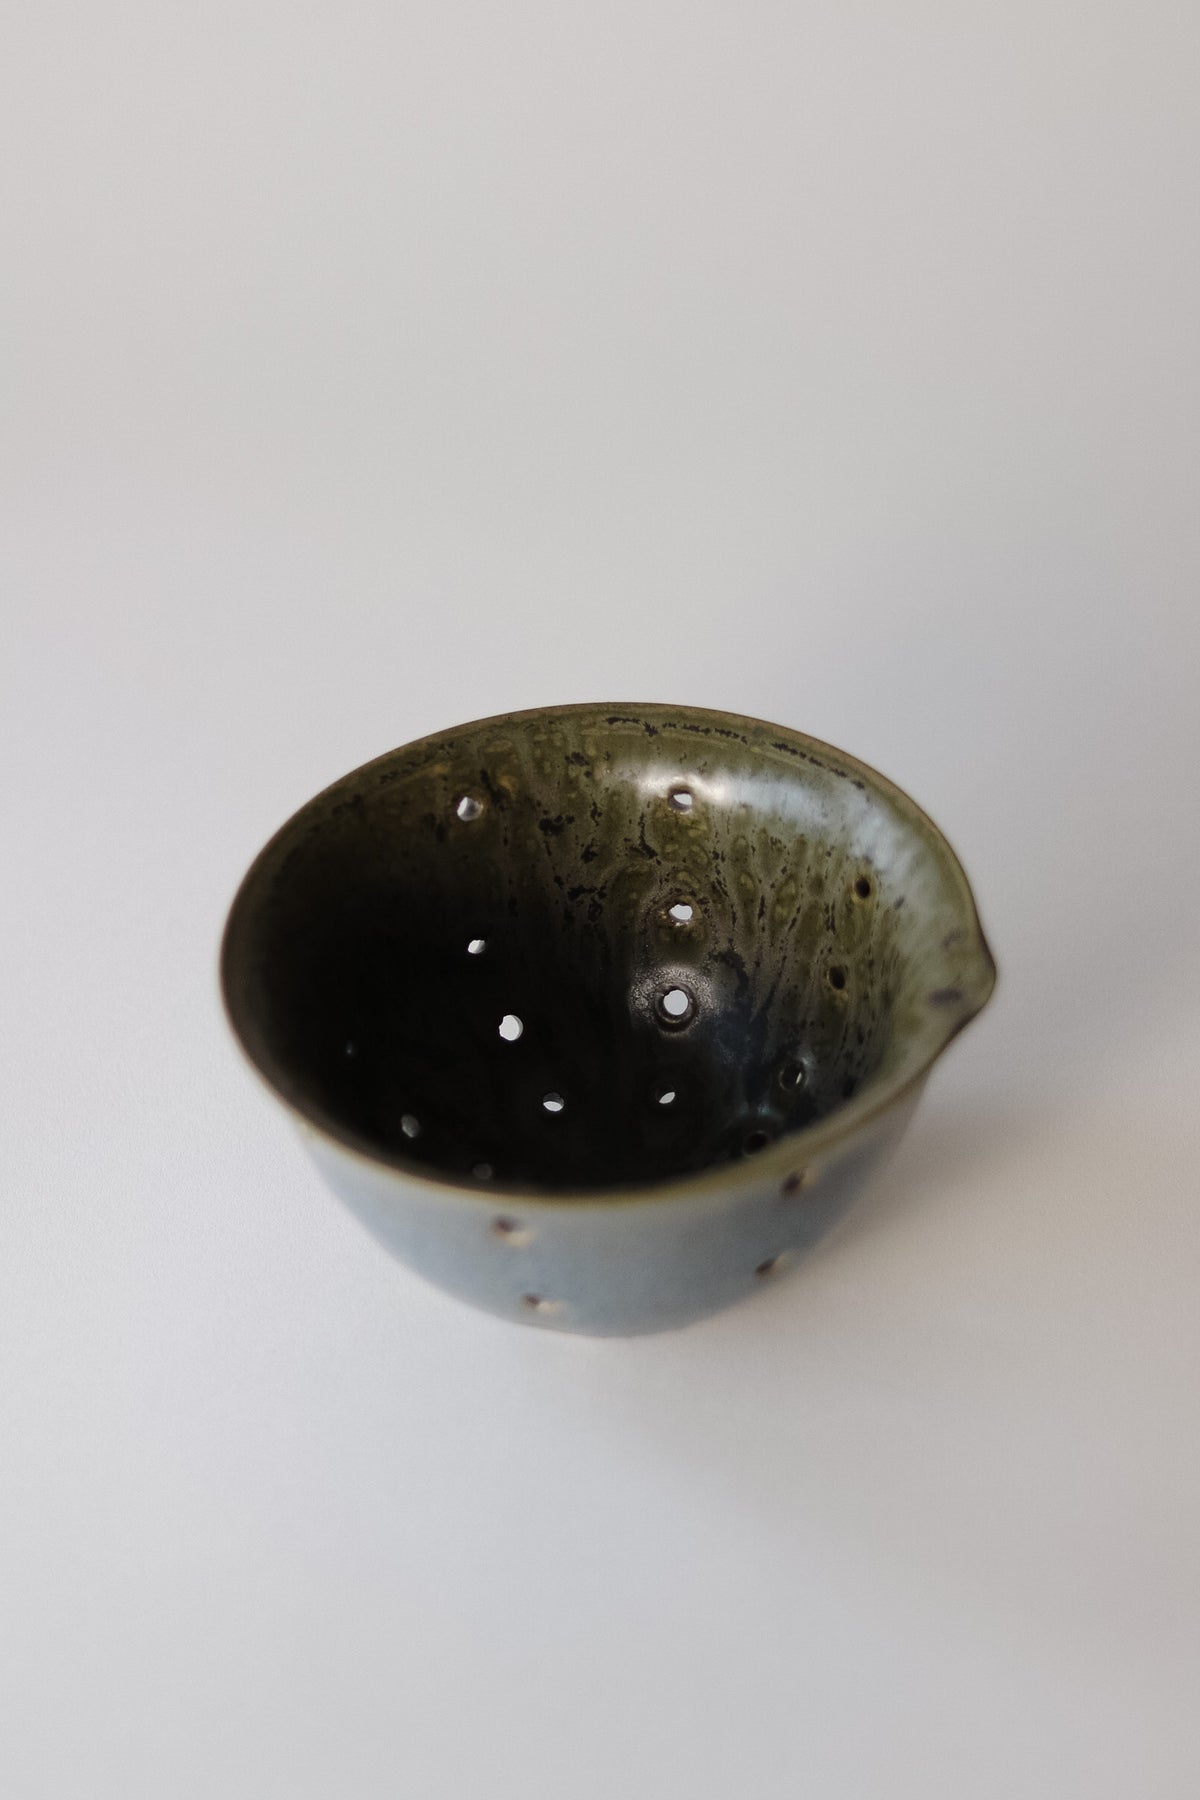 An earthy stoneware berry bowl with a textured exterior and a smooth interior.